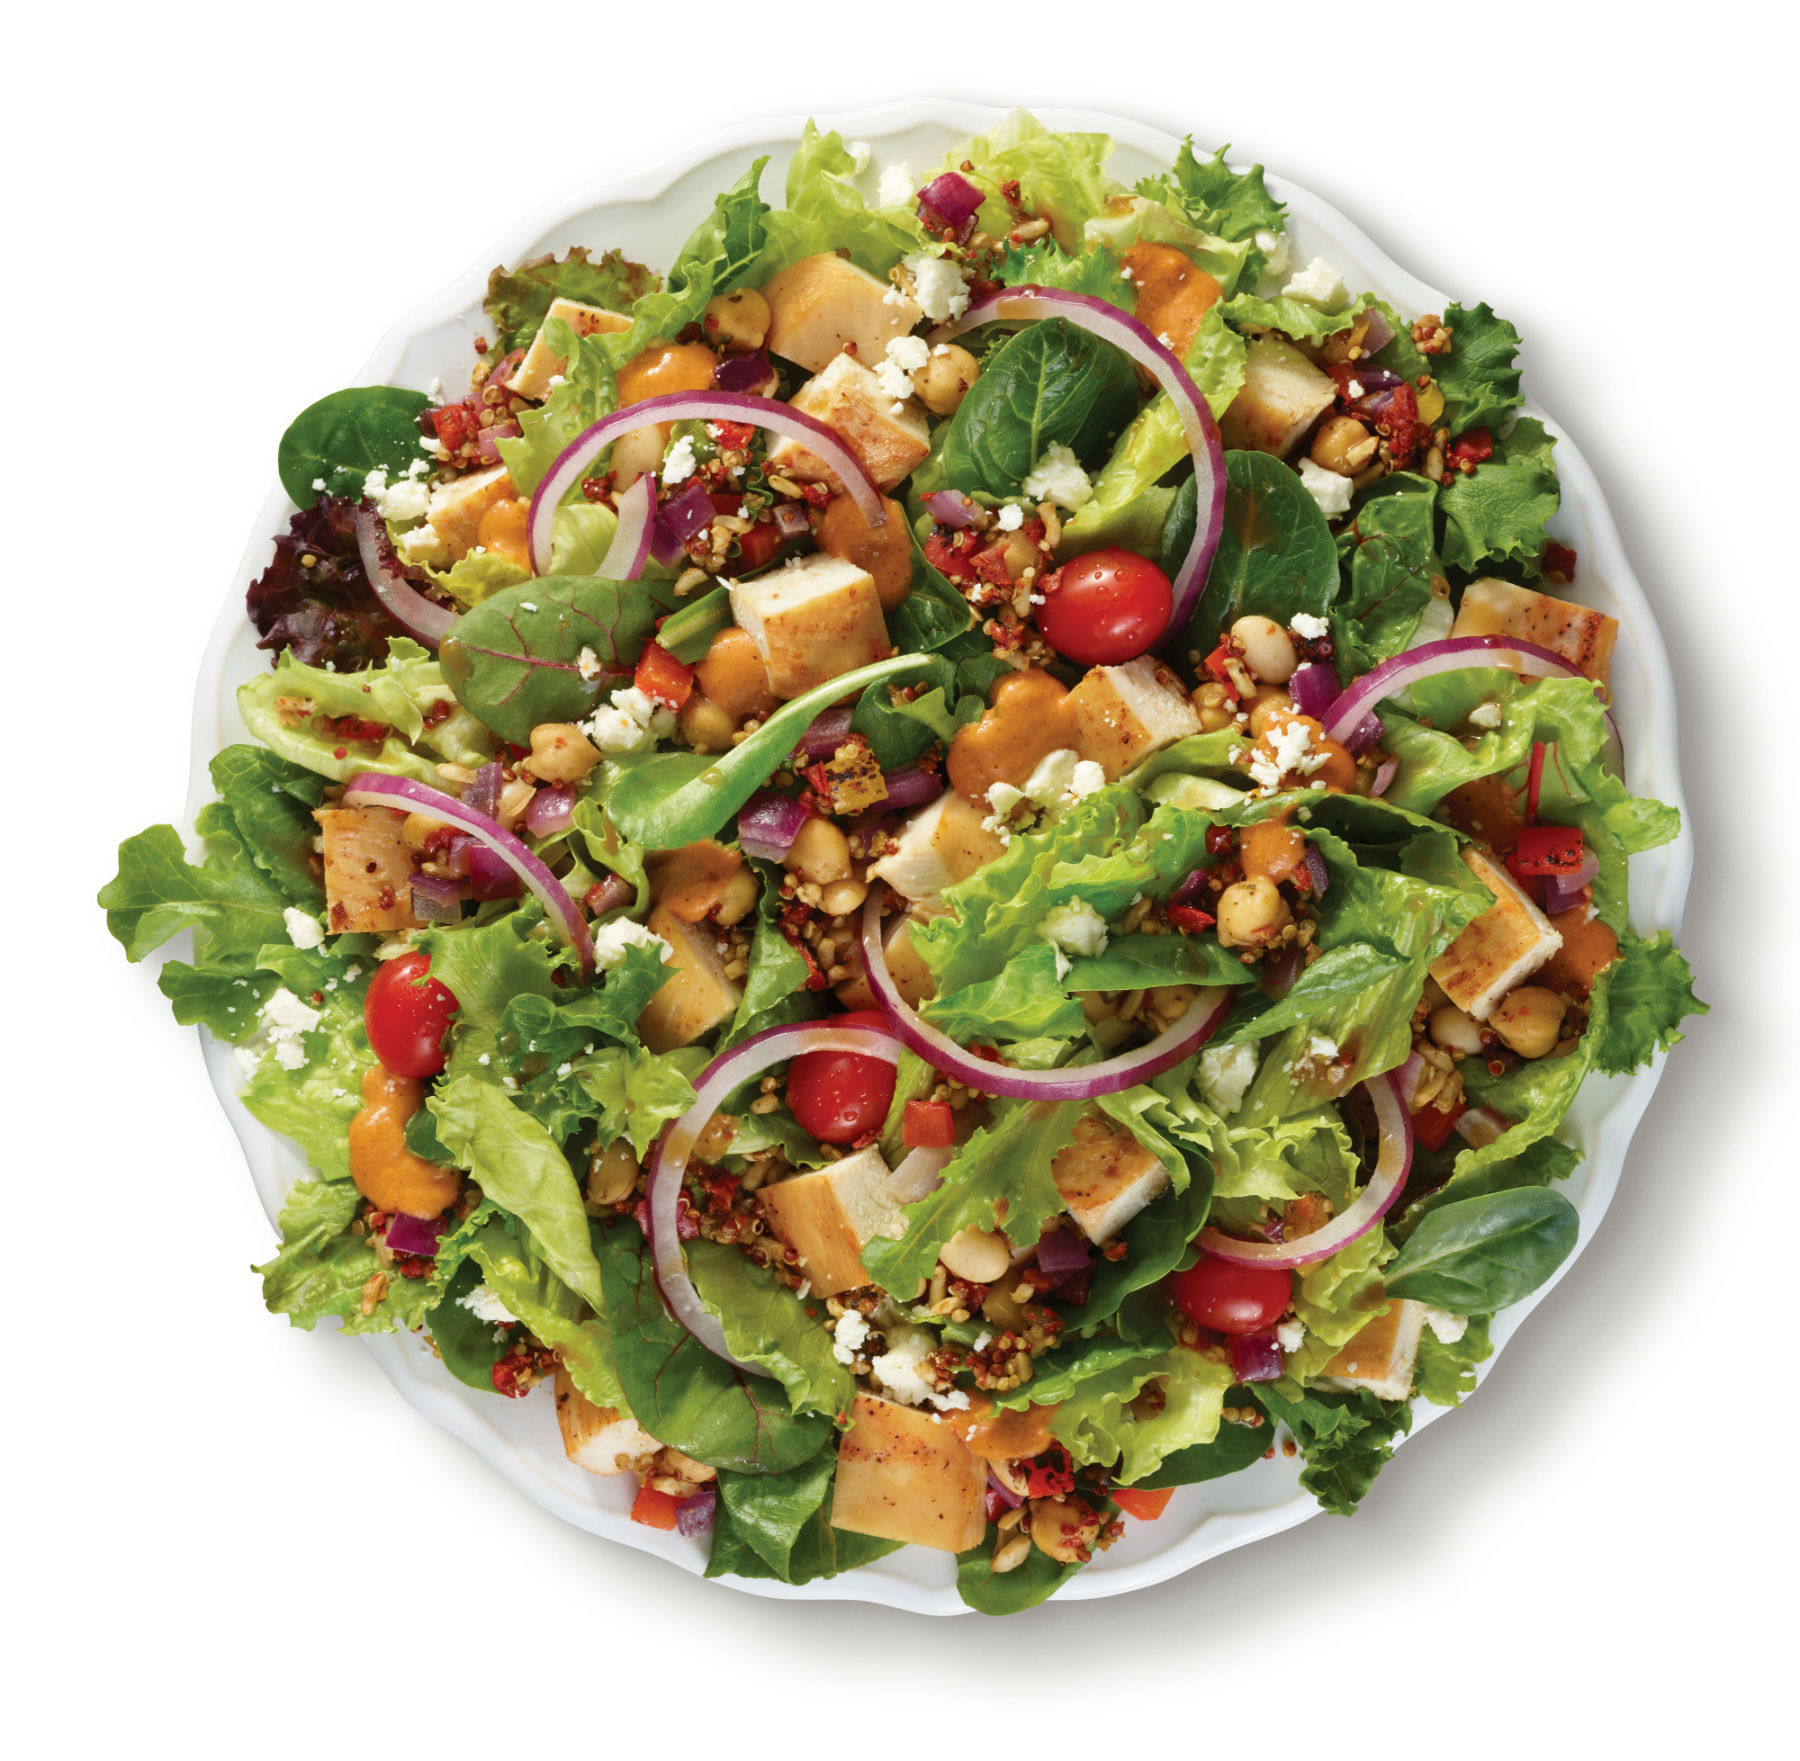 Woah Now! Wendy's Delish New Salad For The Summer LATF USA